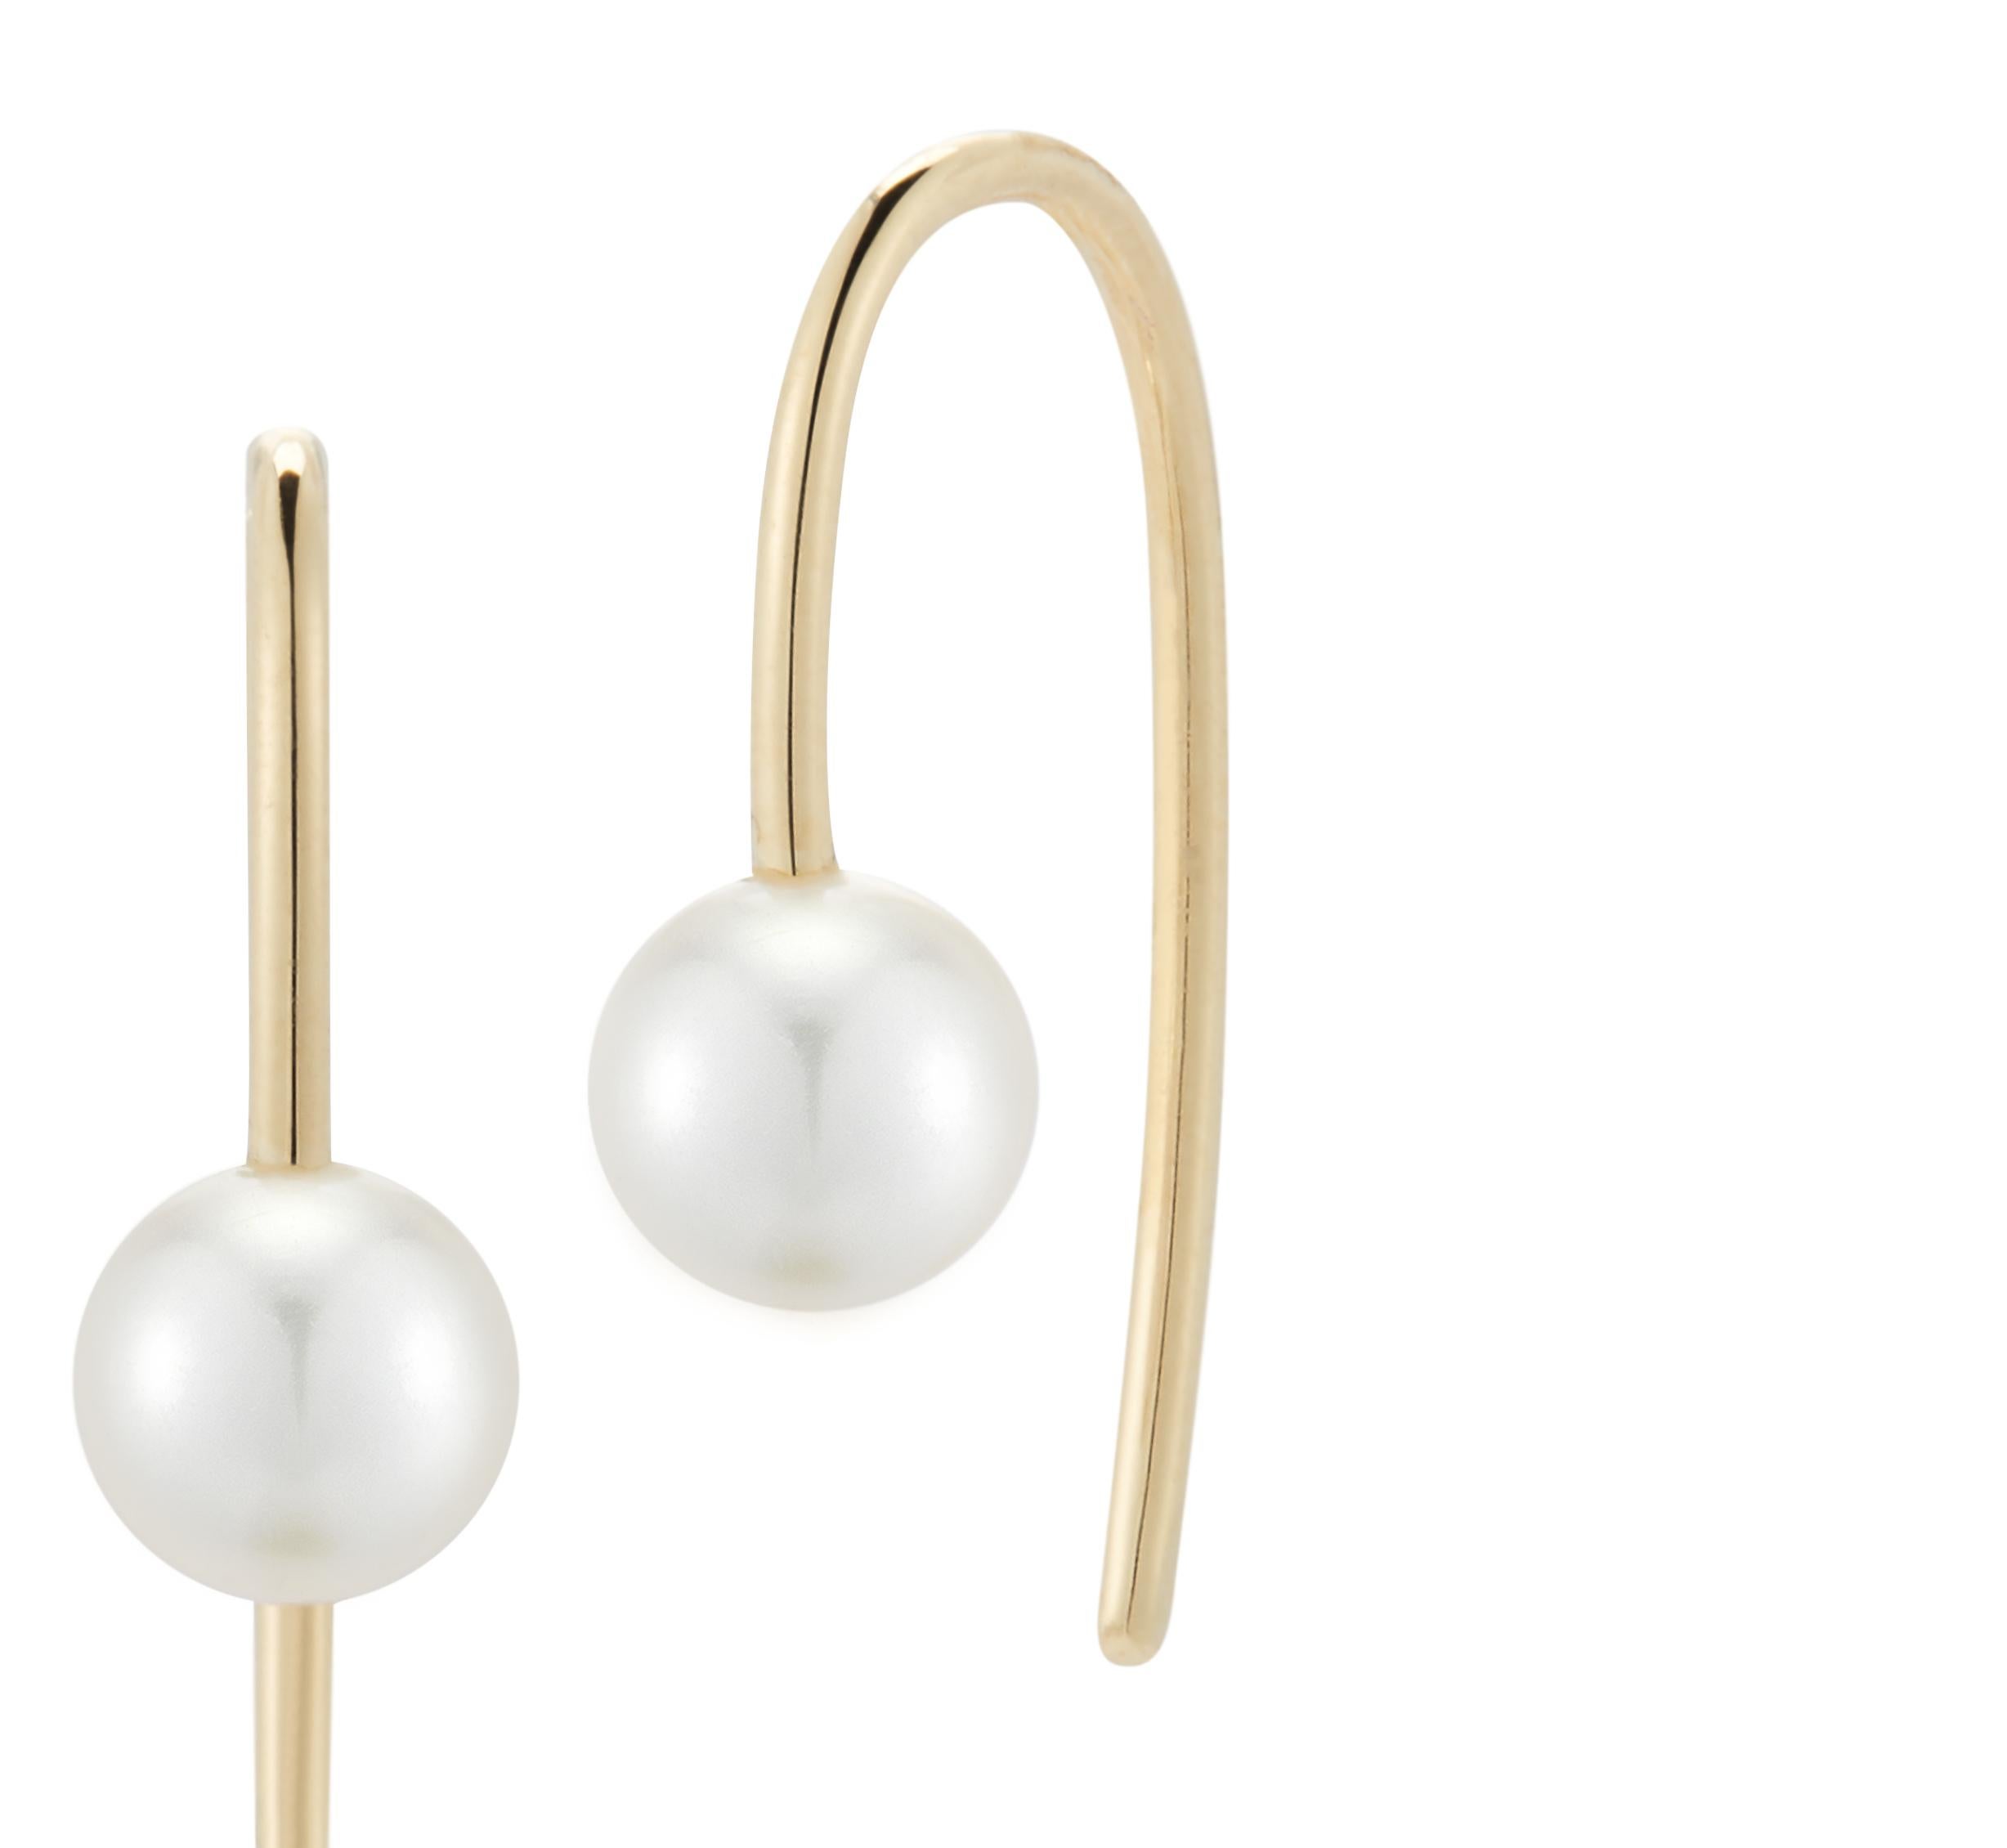 A simple 5mm pearl fixed on a simple gold french hook. Wear as a pair, or in a single piercing, or two or three in a row up your ear.

18k gold
5mm Akoya pearl
can be sold individually, just email
complimentary domestic ground shipping 

NB: All of